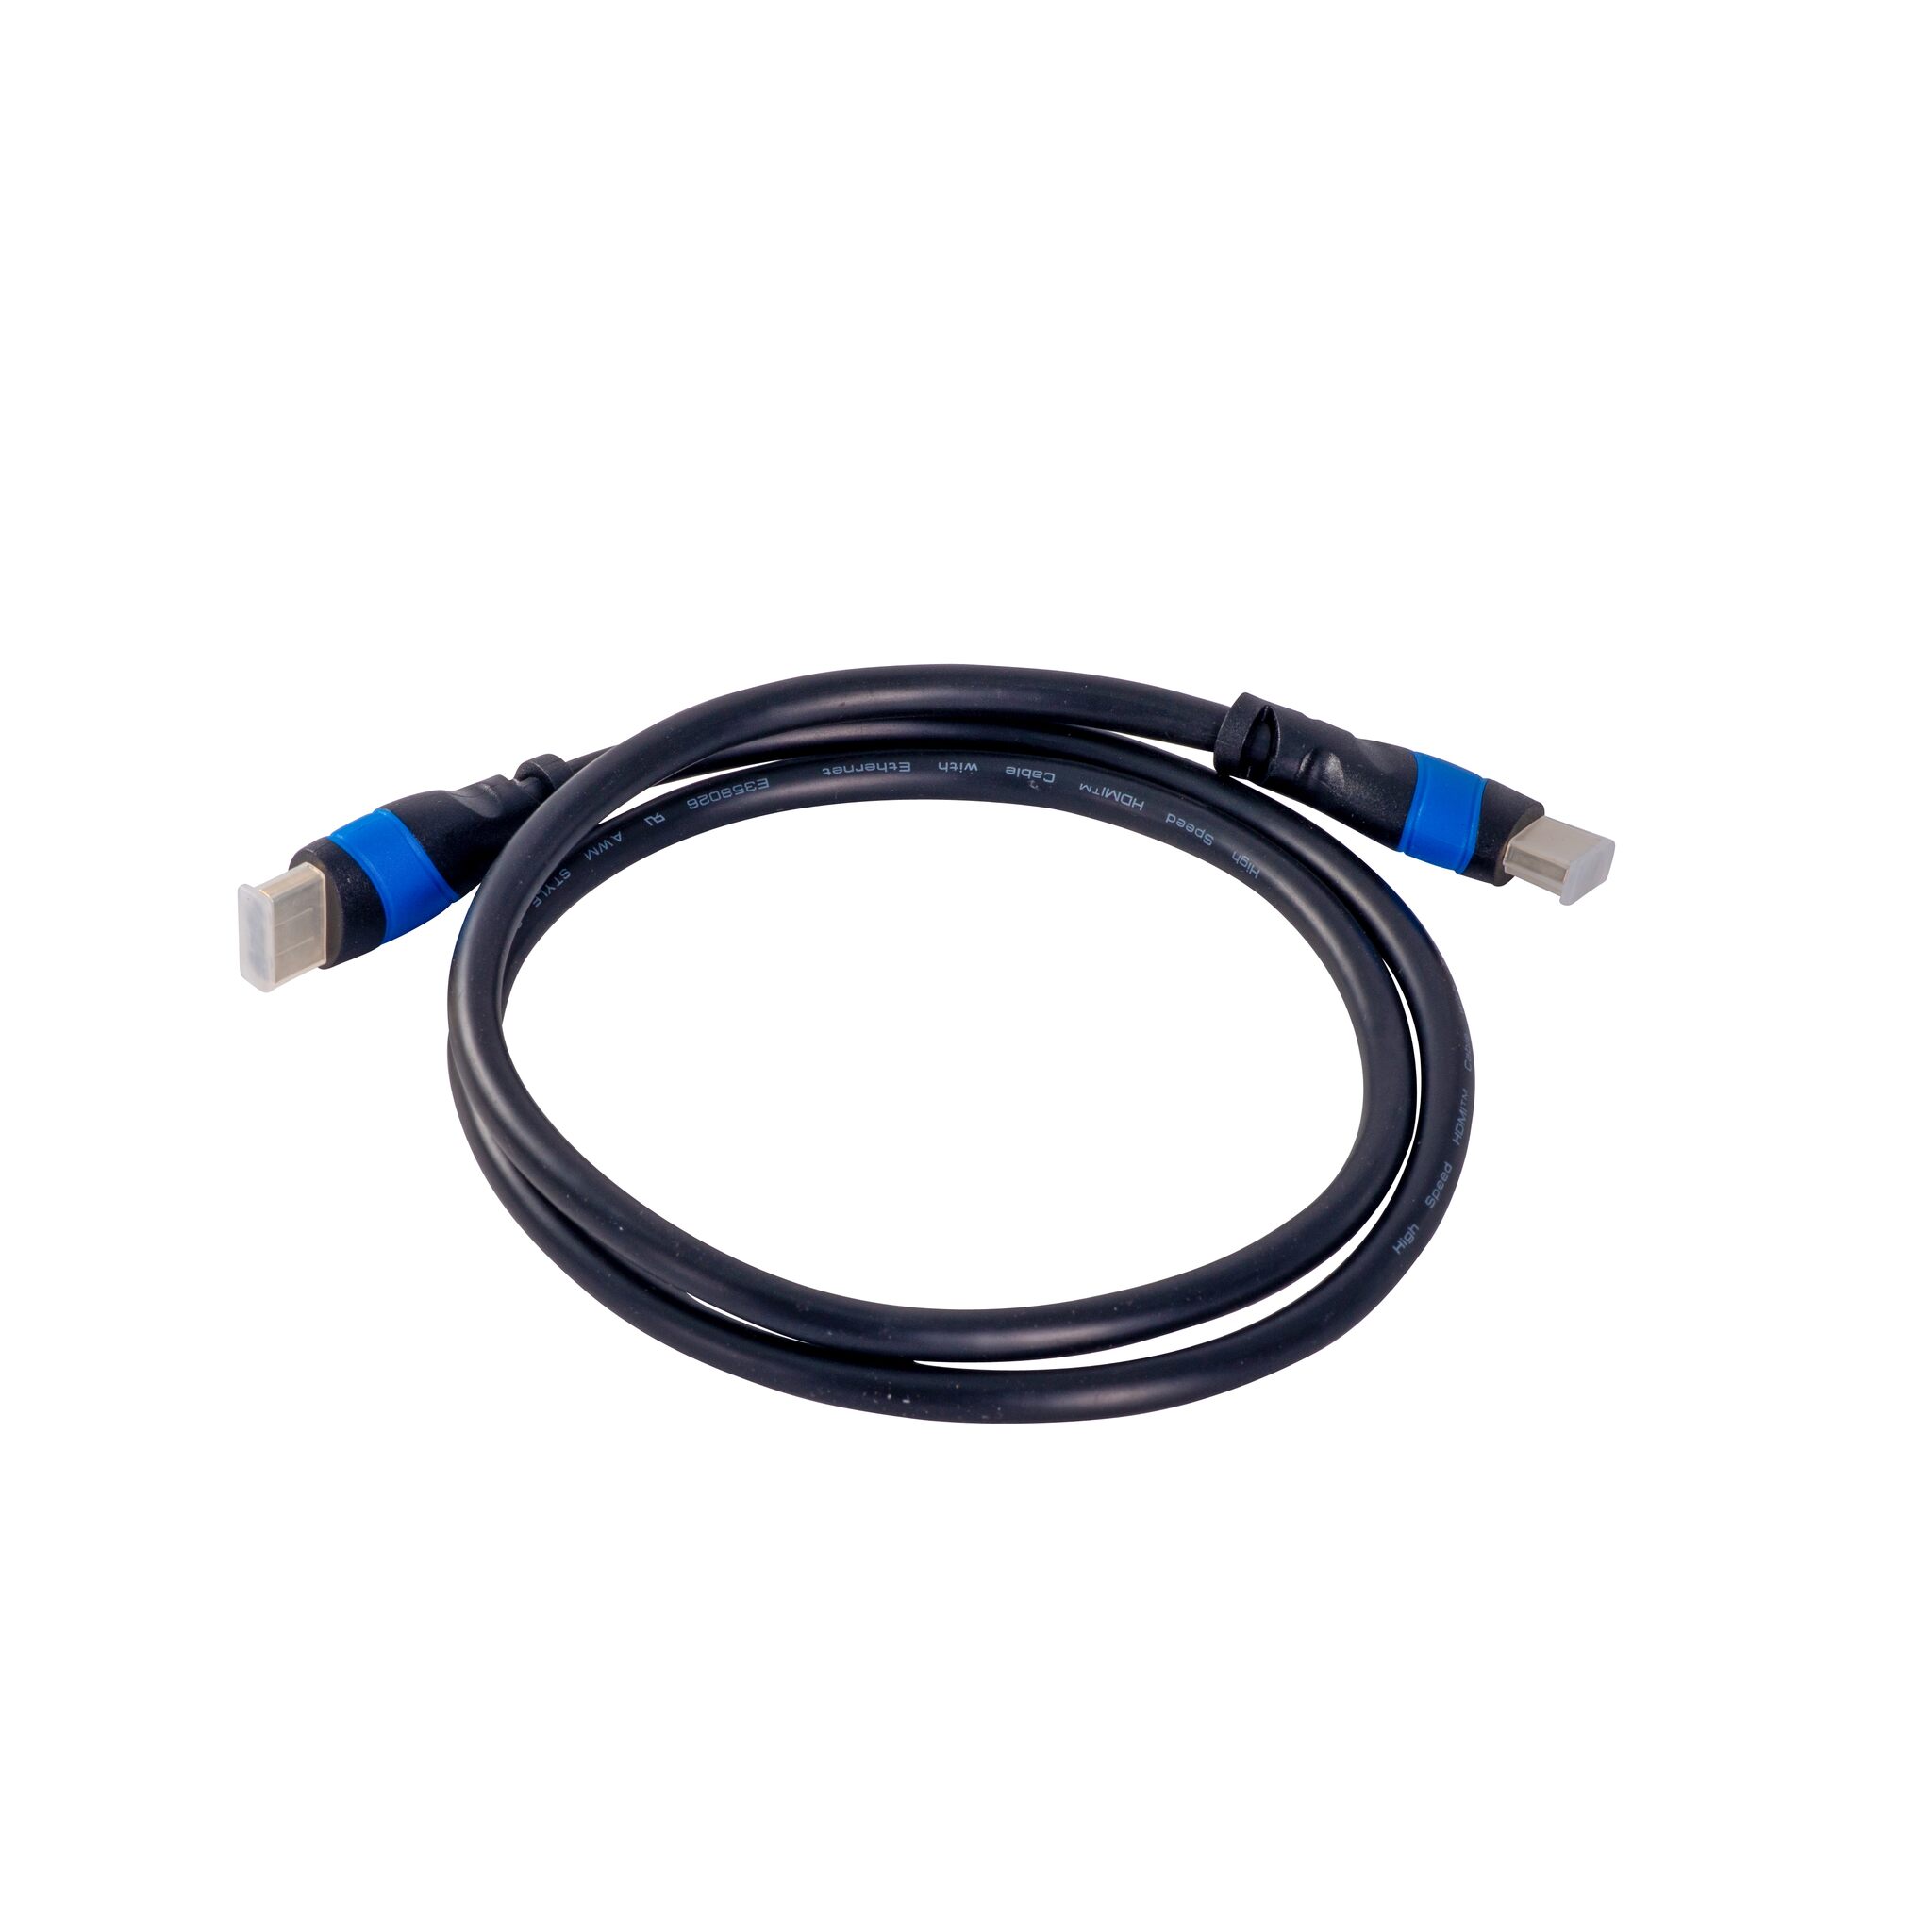 HDMI cable for TV to DVB-T2 receiver connection